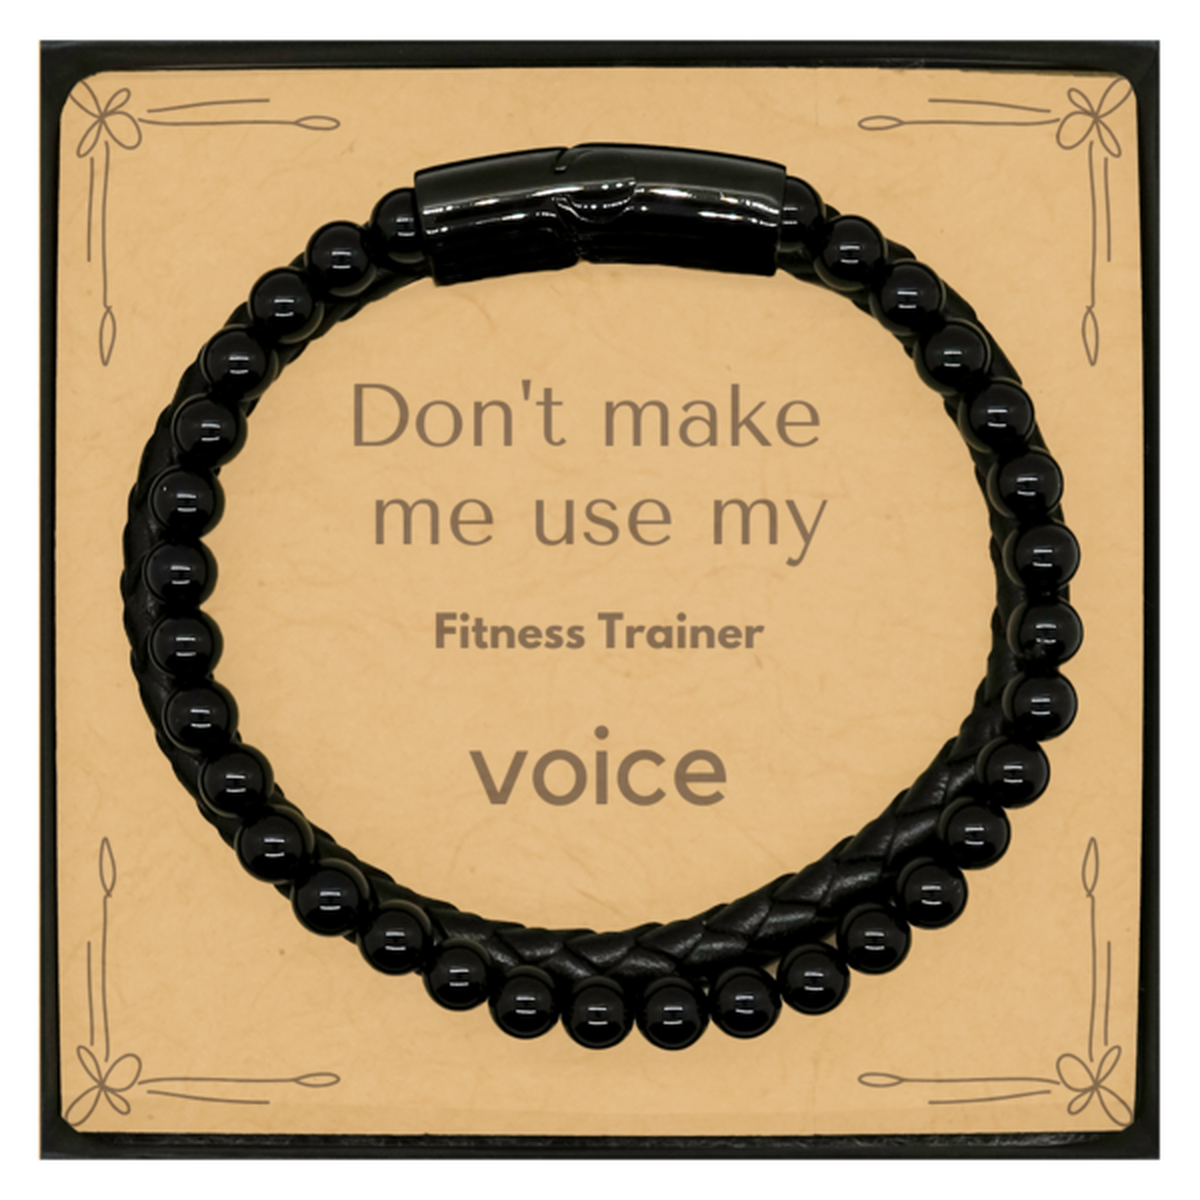 Don't make me use my Fitness Trainer voice, Sarcasm Fitness Trainer Card Gifts, Christmas Fitness Trainer Stone Leather Bracelets Birthday Unique Gifts For Fitness Trainer Coworkers, Men, Women, Colleague, Friends